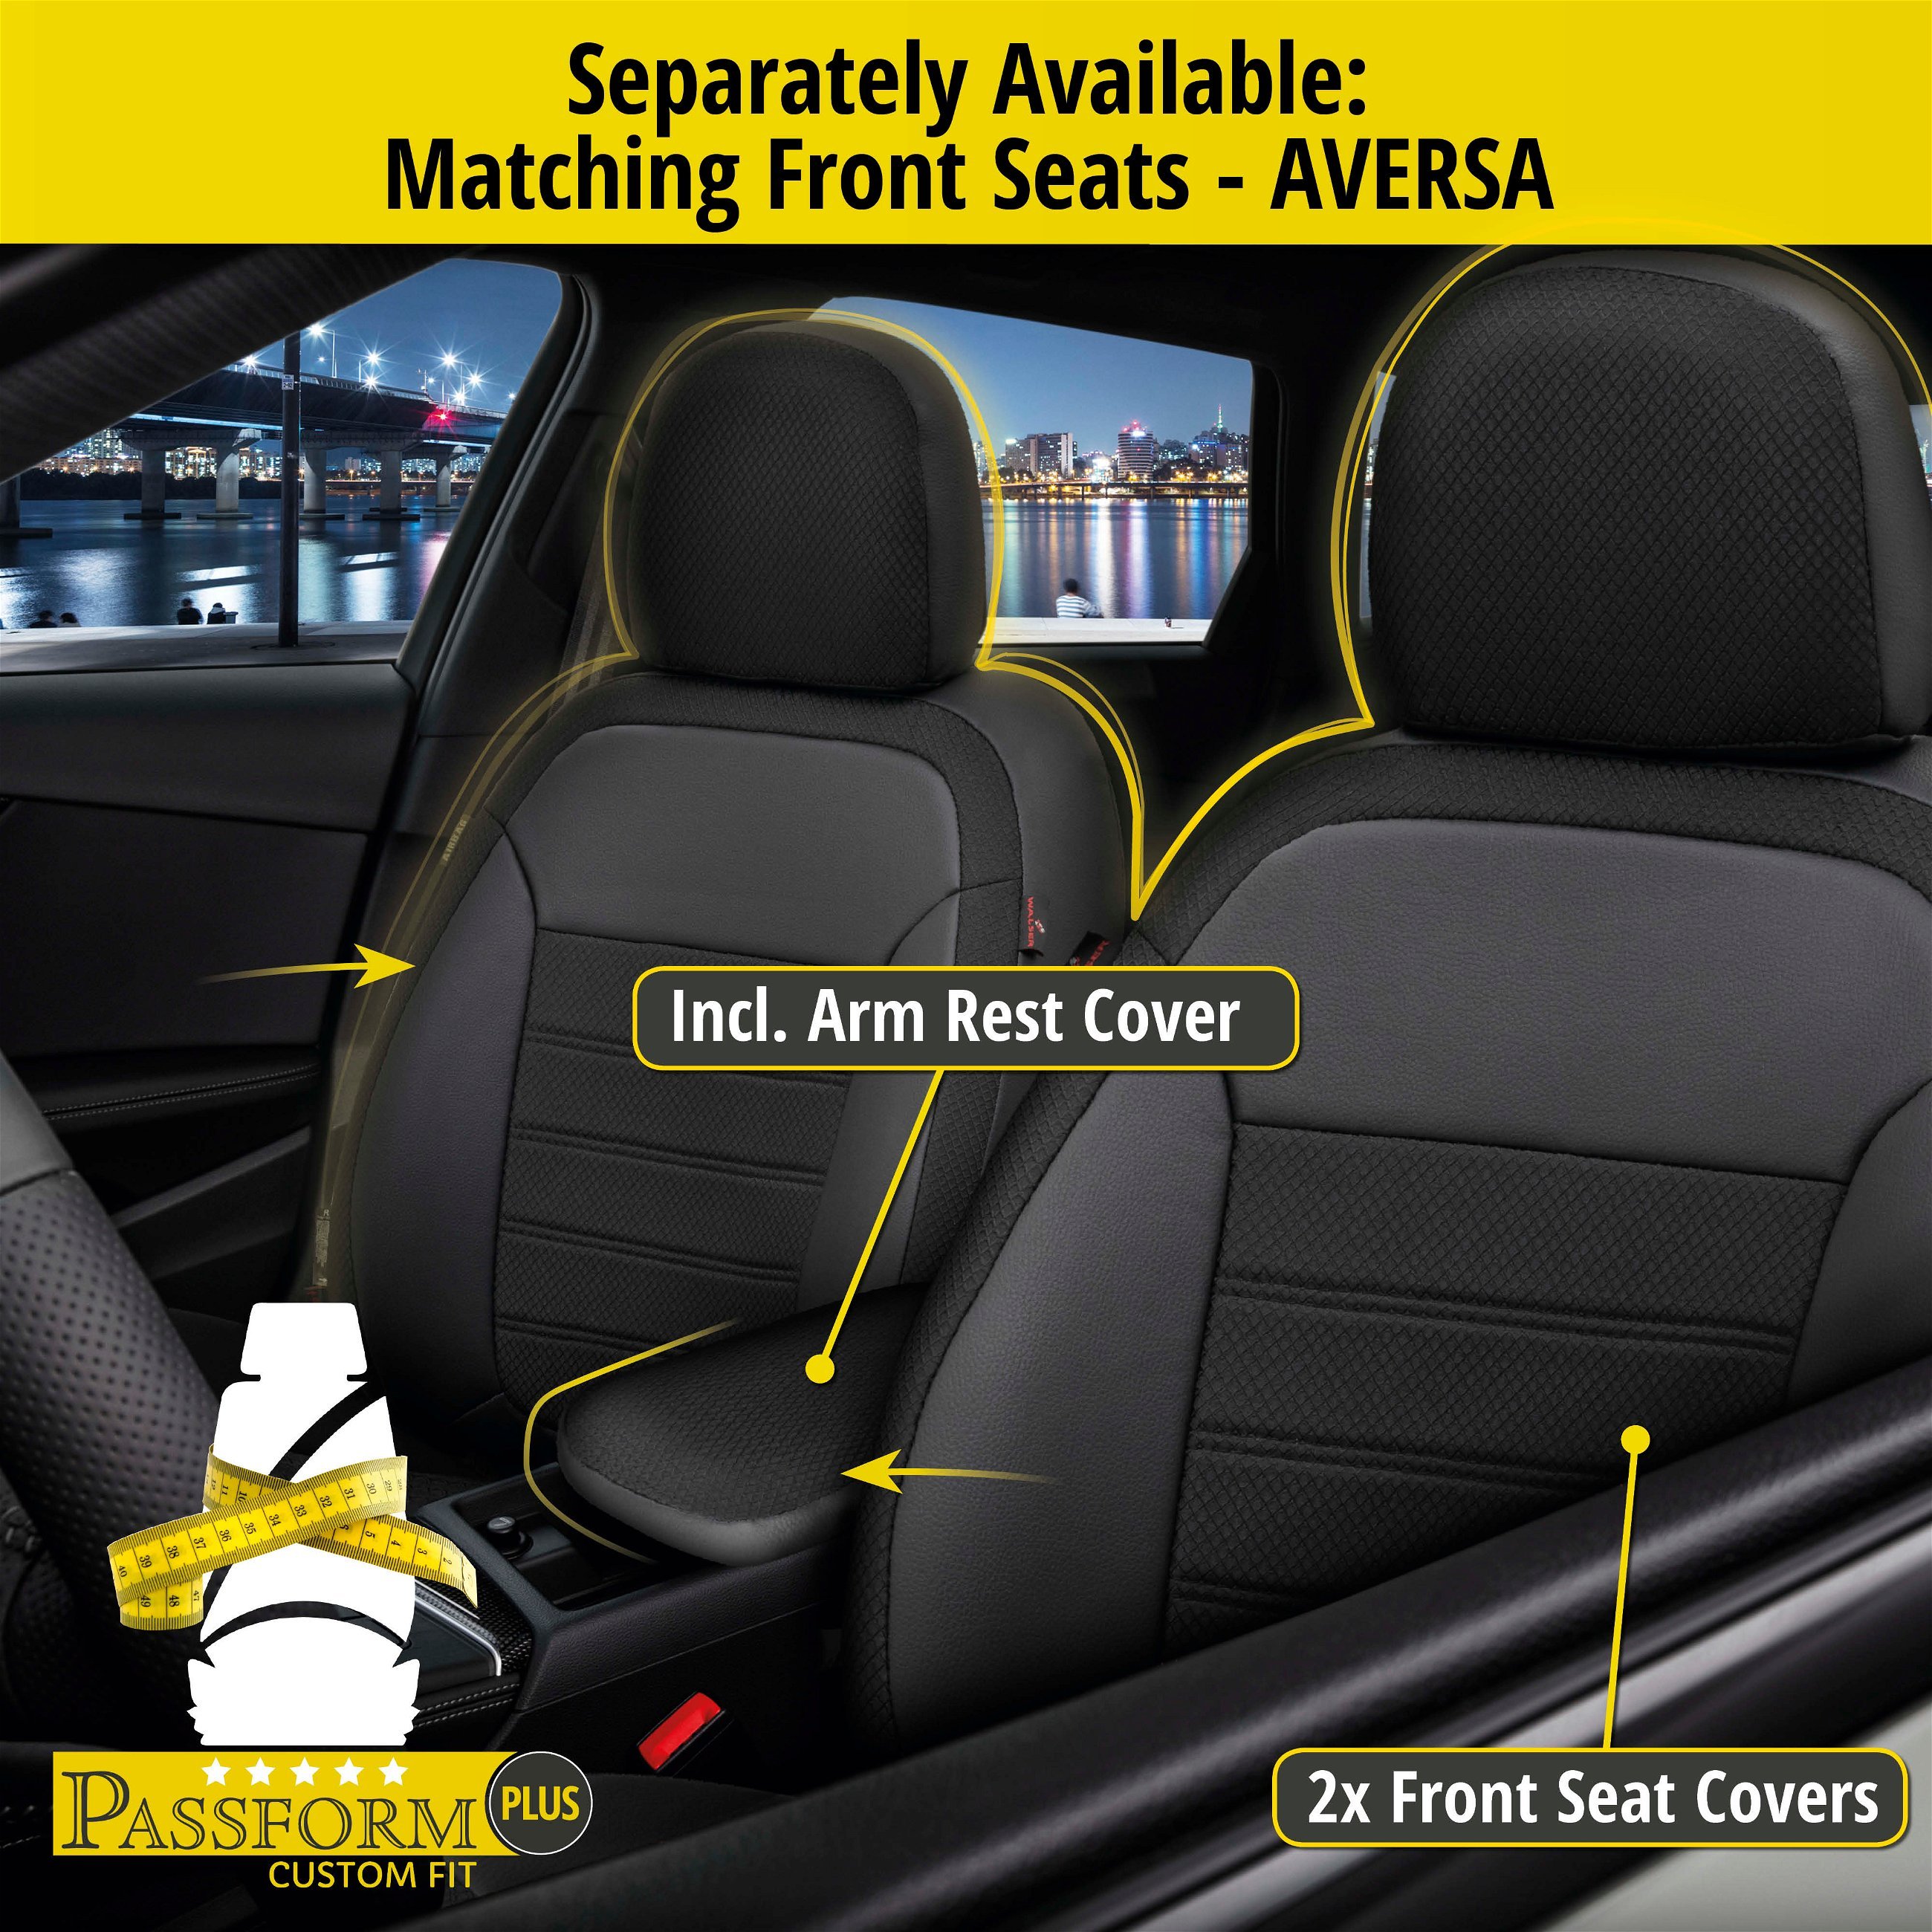 Seat Cover Aversa for Opel Corsa D (S07) 07/2006-08/2014, 1 rear seat cover for normal seats